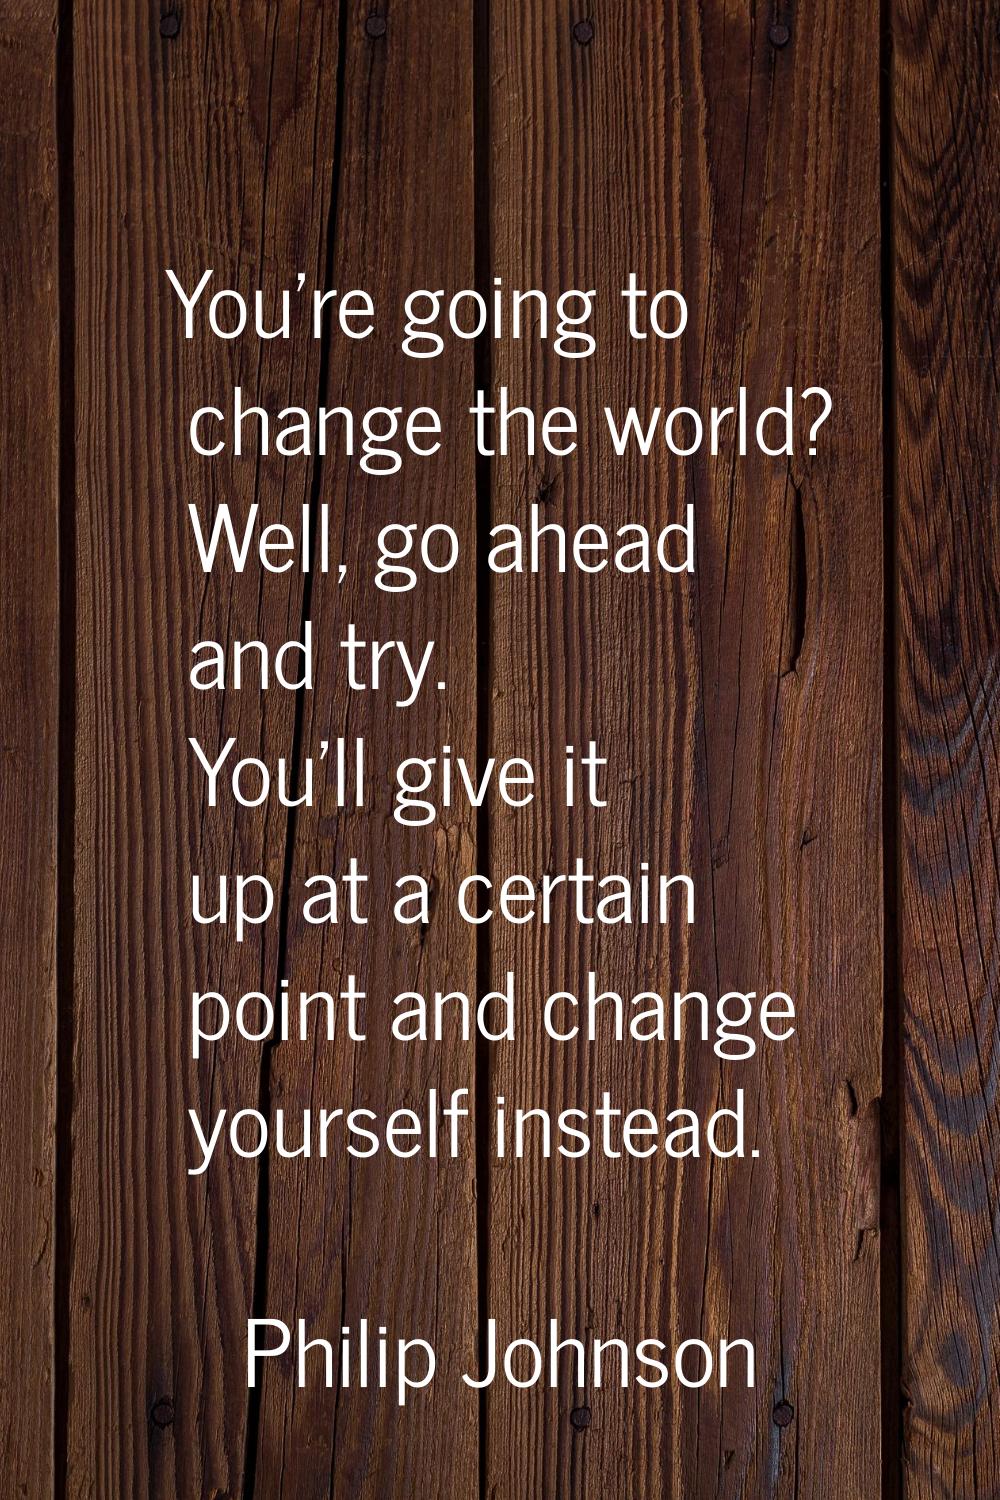 You're going to change the world? Well, go ahead and try. You'll give it up at a certain point and 